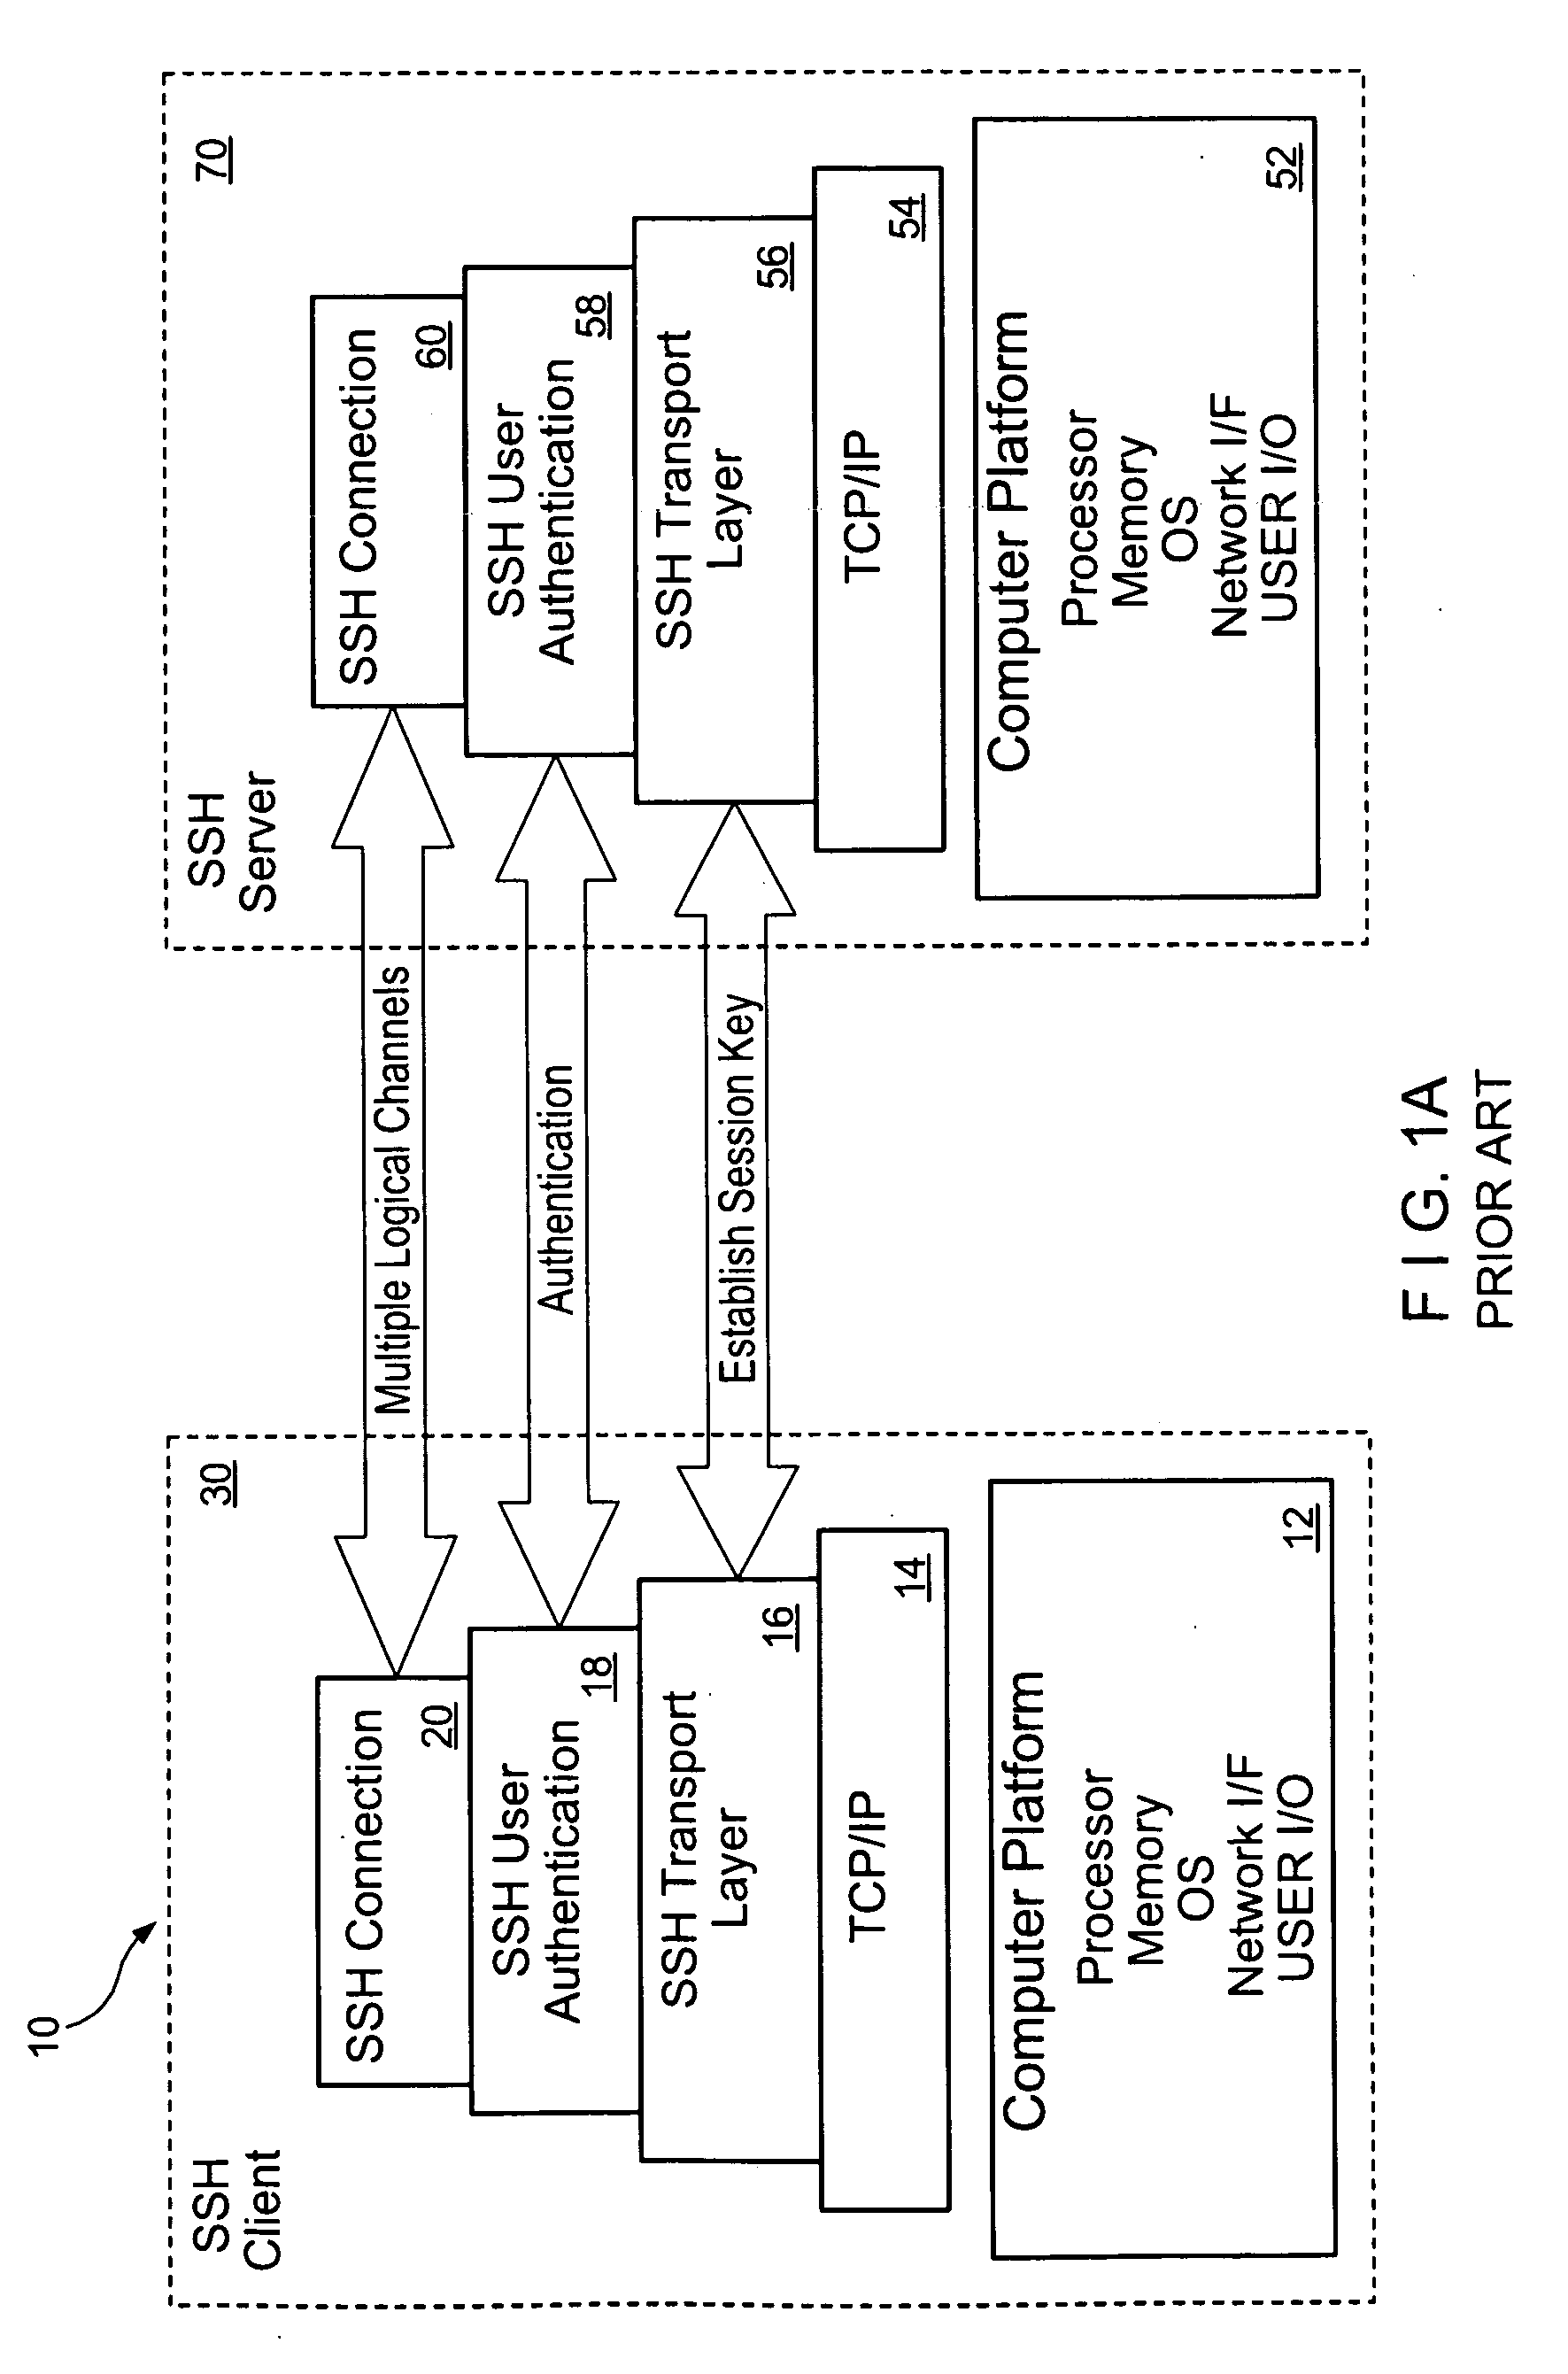 System and Method for Managing Access to a Plurality of Servers in an Organization